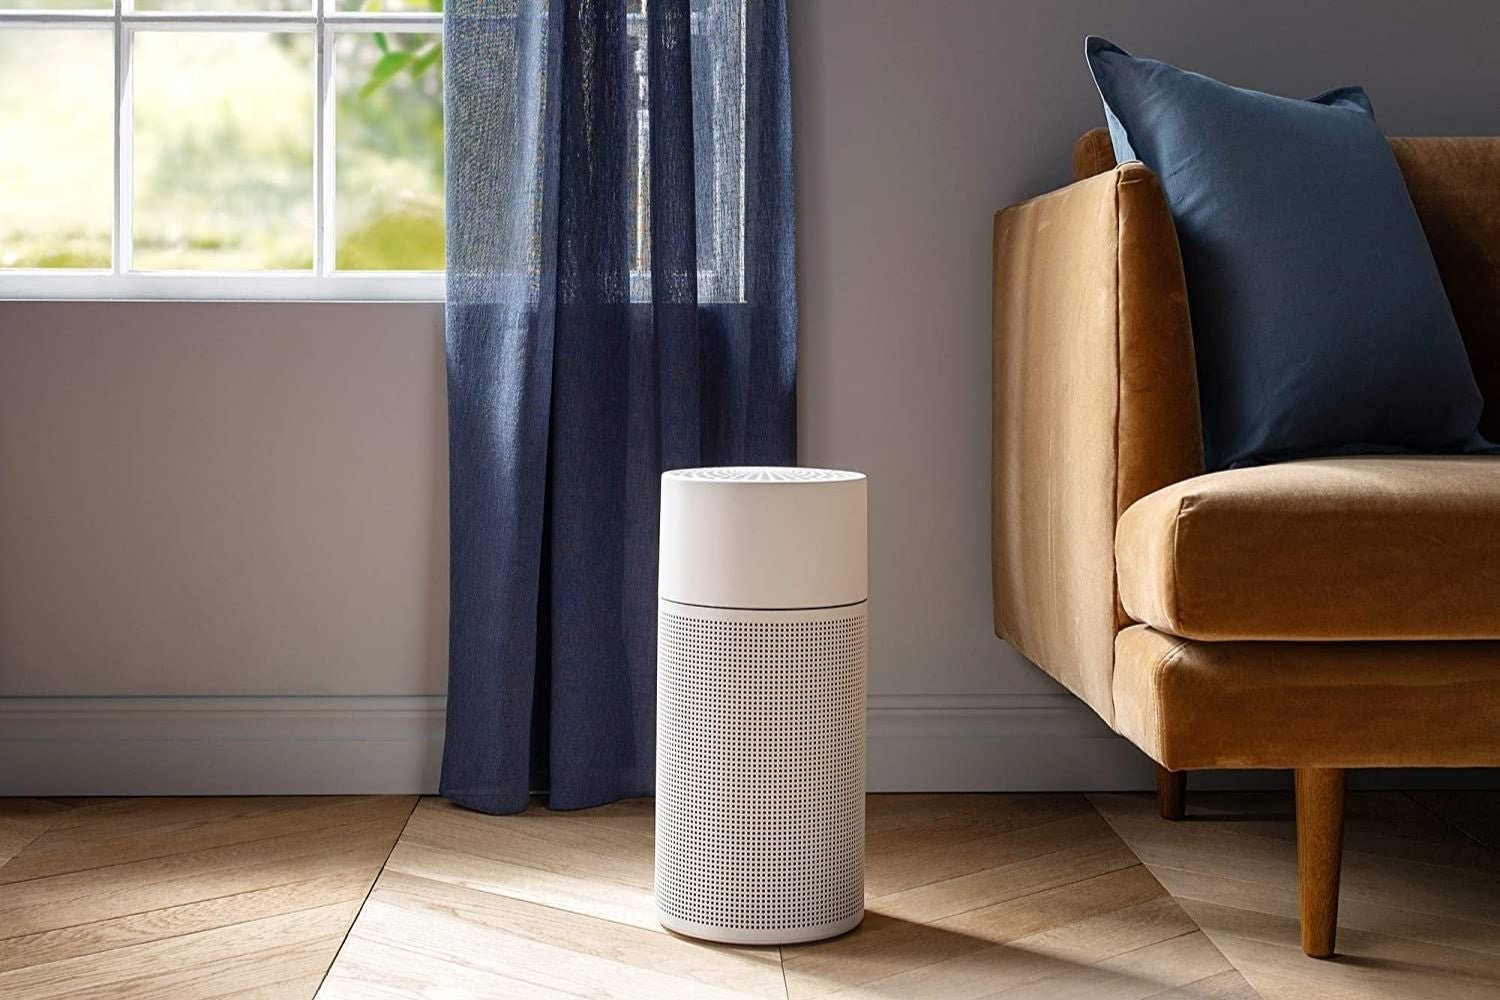 The Best Air Purifiers for Wildfire Smoke in 2022